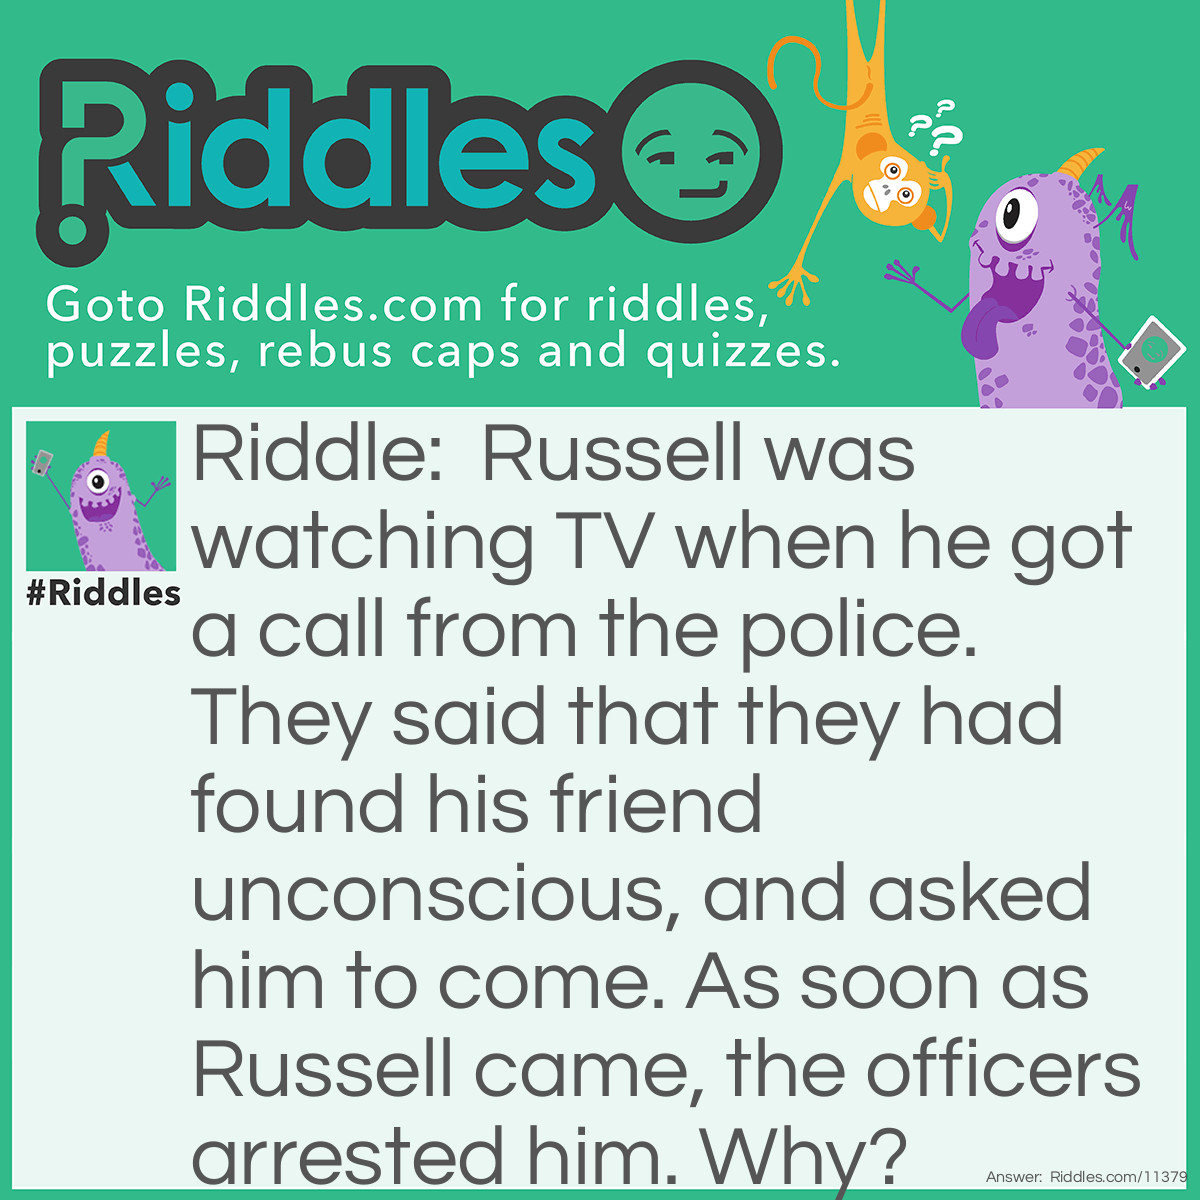 Riddle: Russell was watching TV when he got a call from the police. They said that they had found his friend unconscious, and asked him to come. As soon as Russell came, the officers arrested him. Why? Answer: The officers didn't tell Russell the exact location to come to. How would the man know where to come if he didn't know what happened?